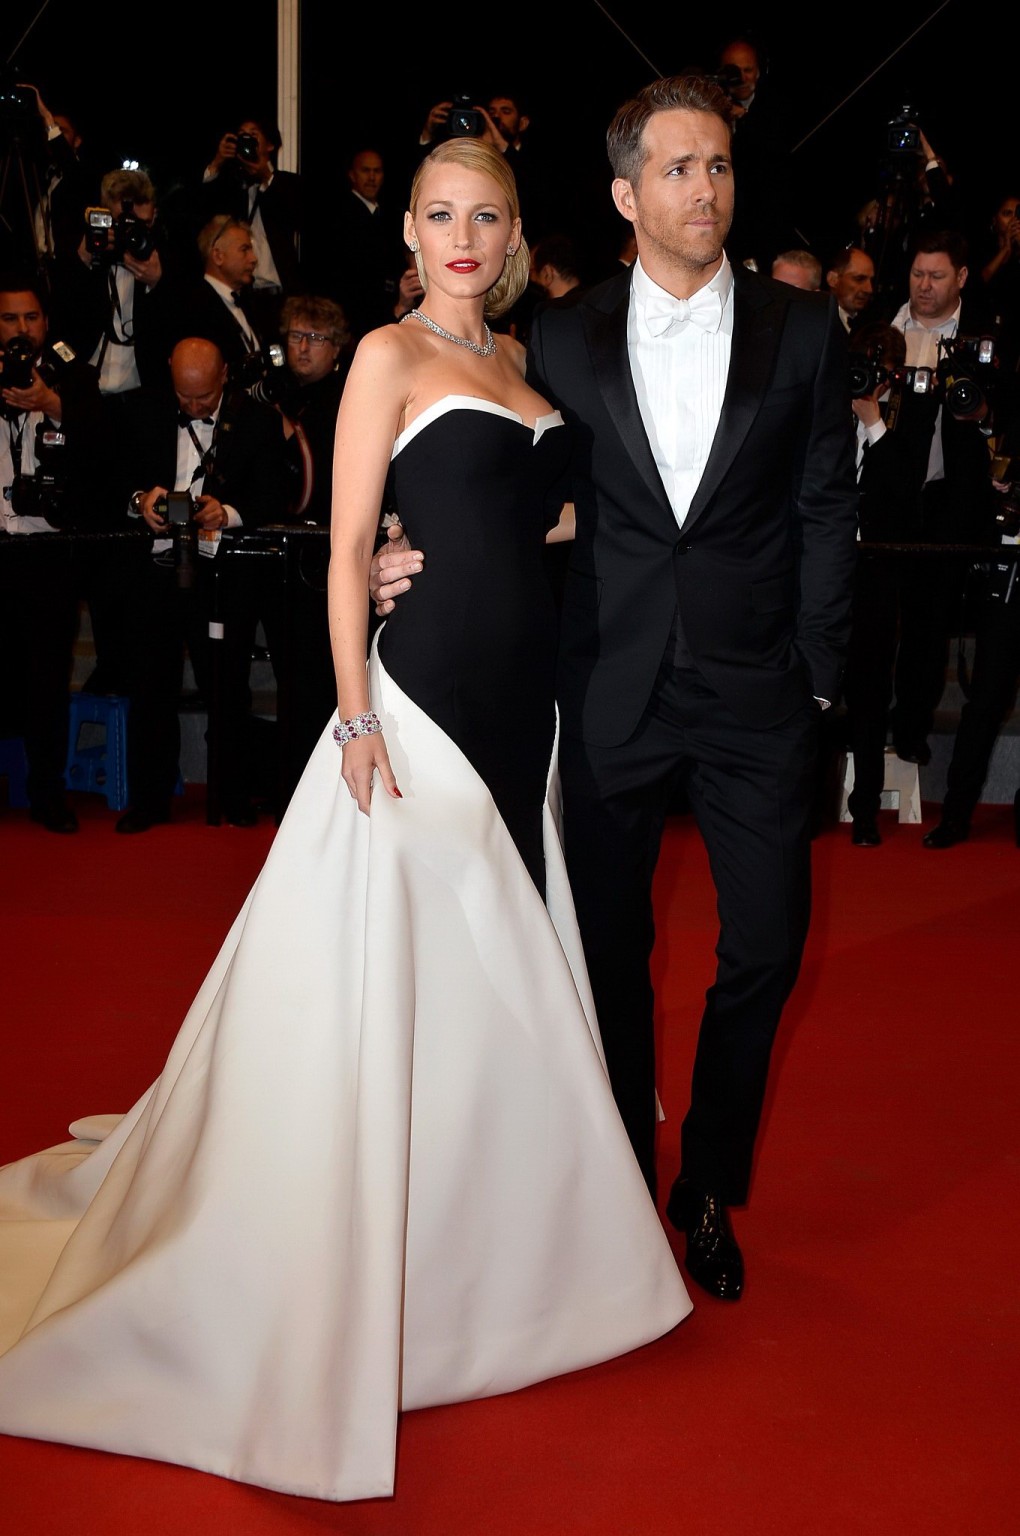 Blake Lively showing huge cleavage at the Captives premiere in Cannes #75196292